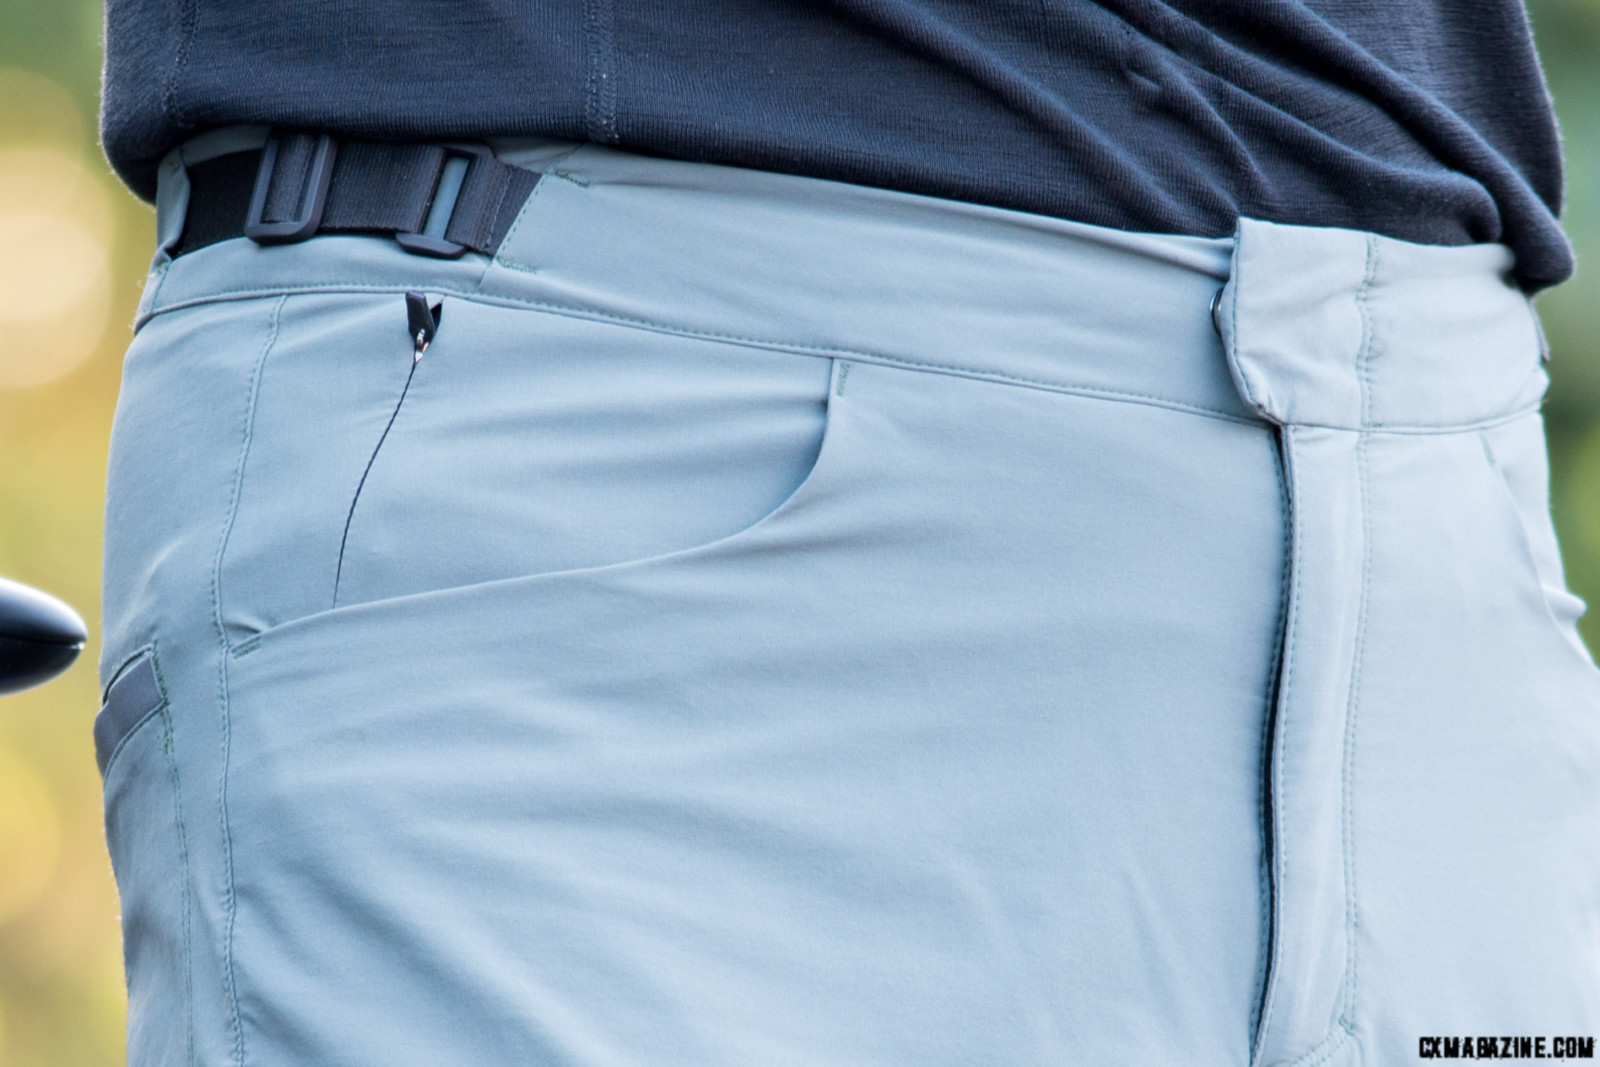 detail on the Gore explore shorts include a zippered key pocket and waistband adjustment